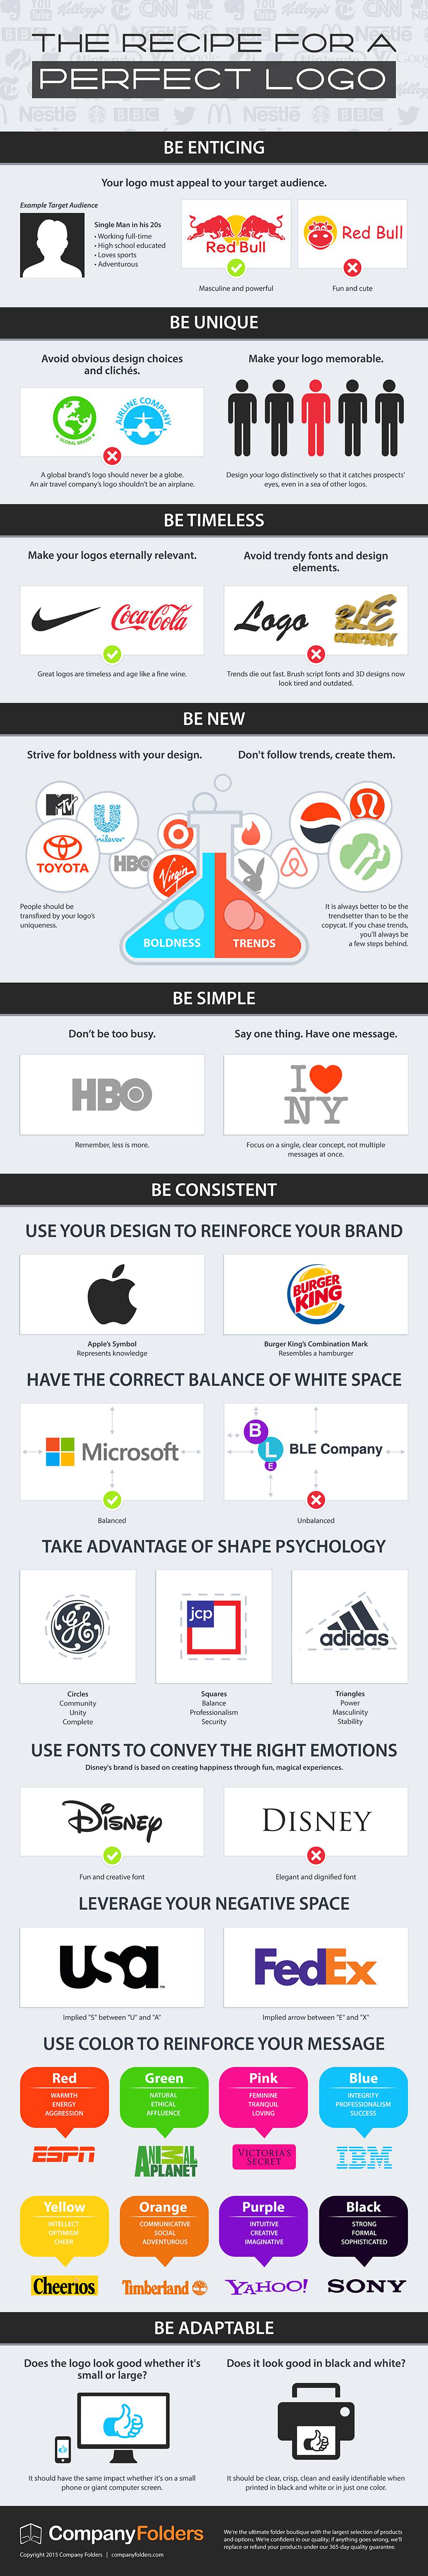 Recipe for the perfect logo by Company Folders